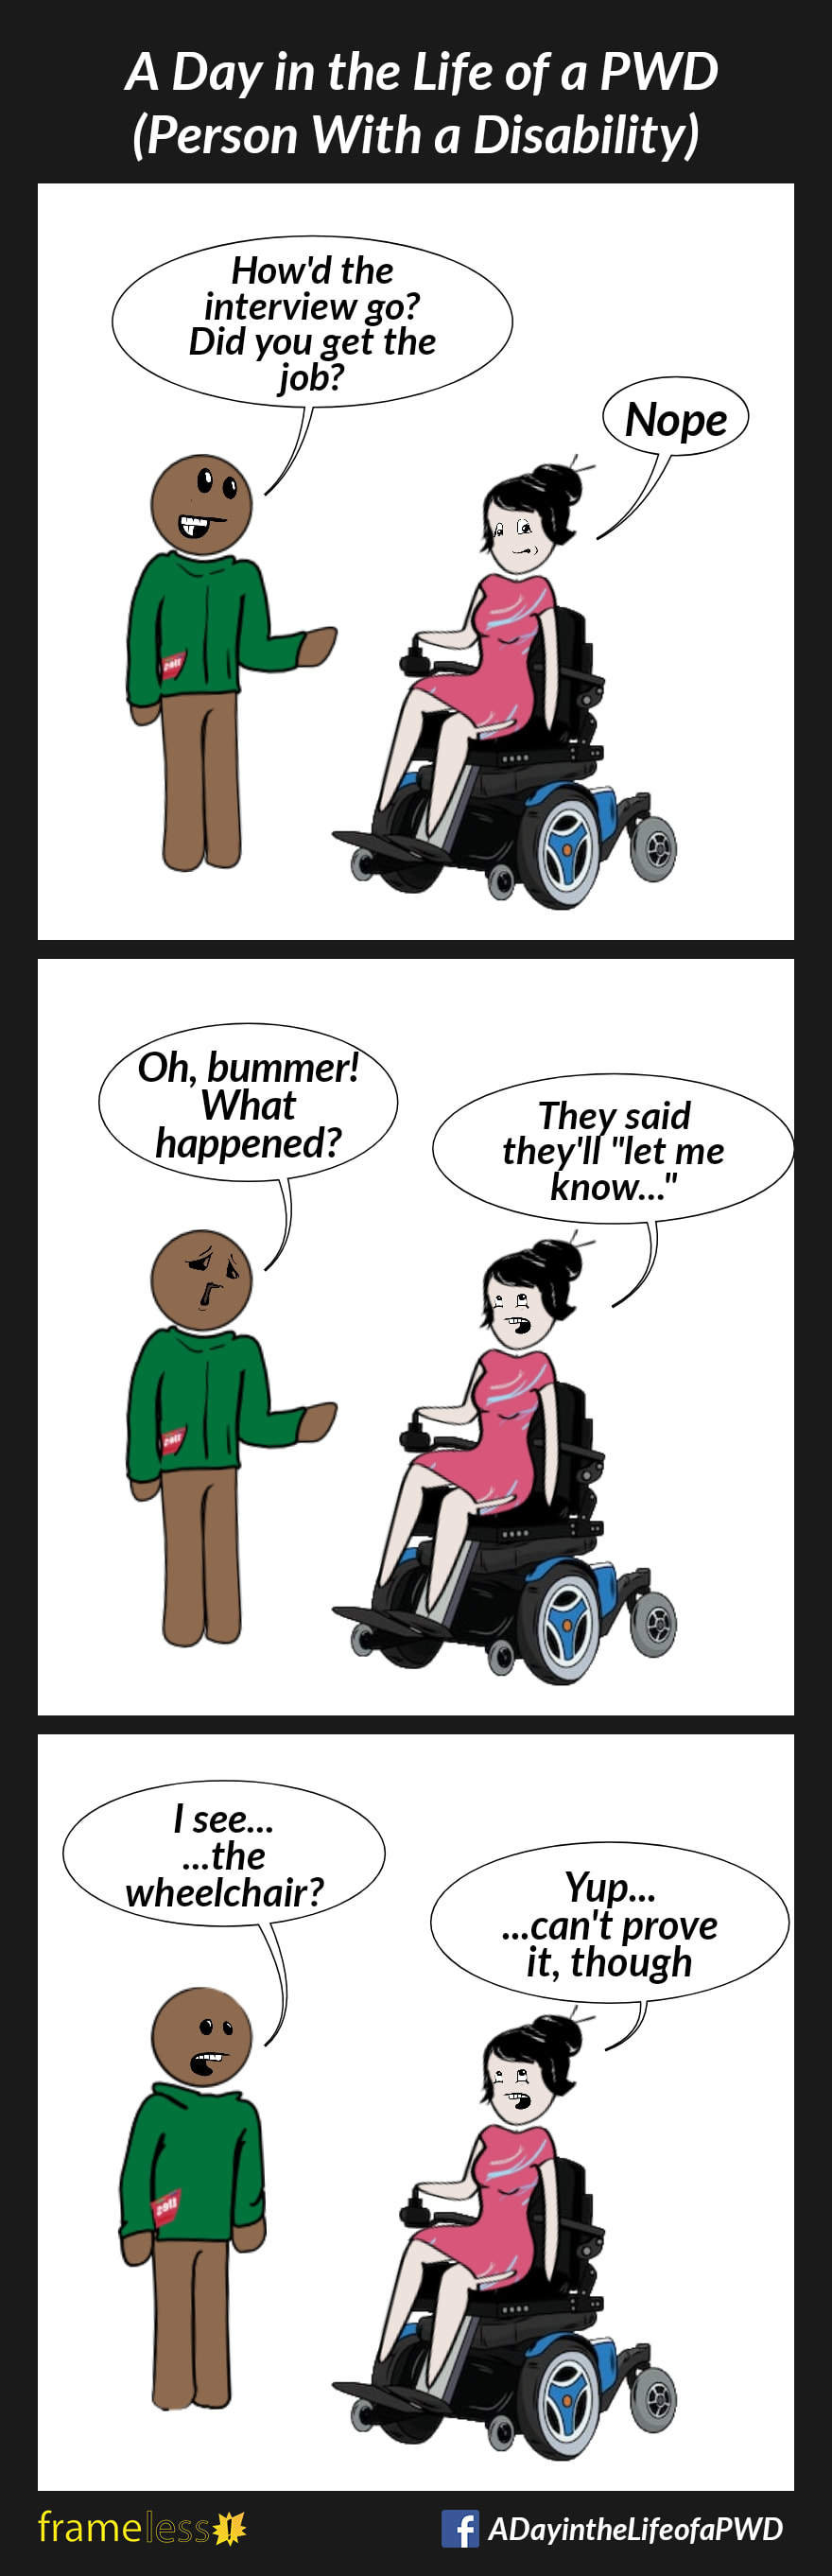 COMIC STRIP 
A Day in the Life of a PWD (Person With a Disability) 

Frame 1:
A woman in a power wheelchair is talking with a friend.
FRIEND: How did the interview go? Did you get the job.
WOMAN: Nope

Frame 2:
FRIEND: Oh, bummer! What happened?
WOMAN: They said they'll 